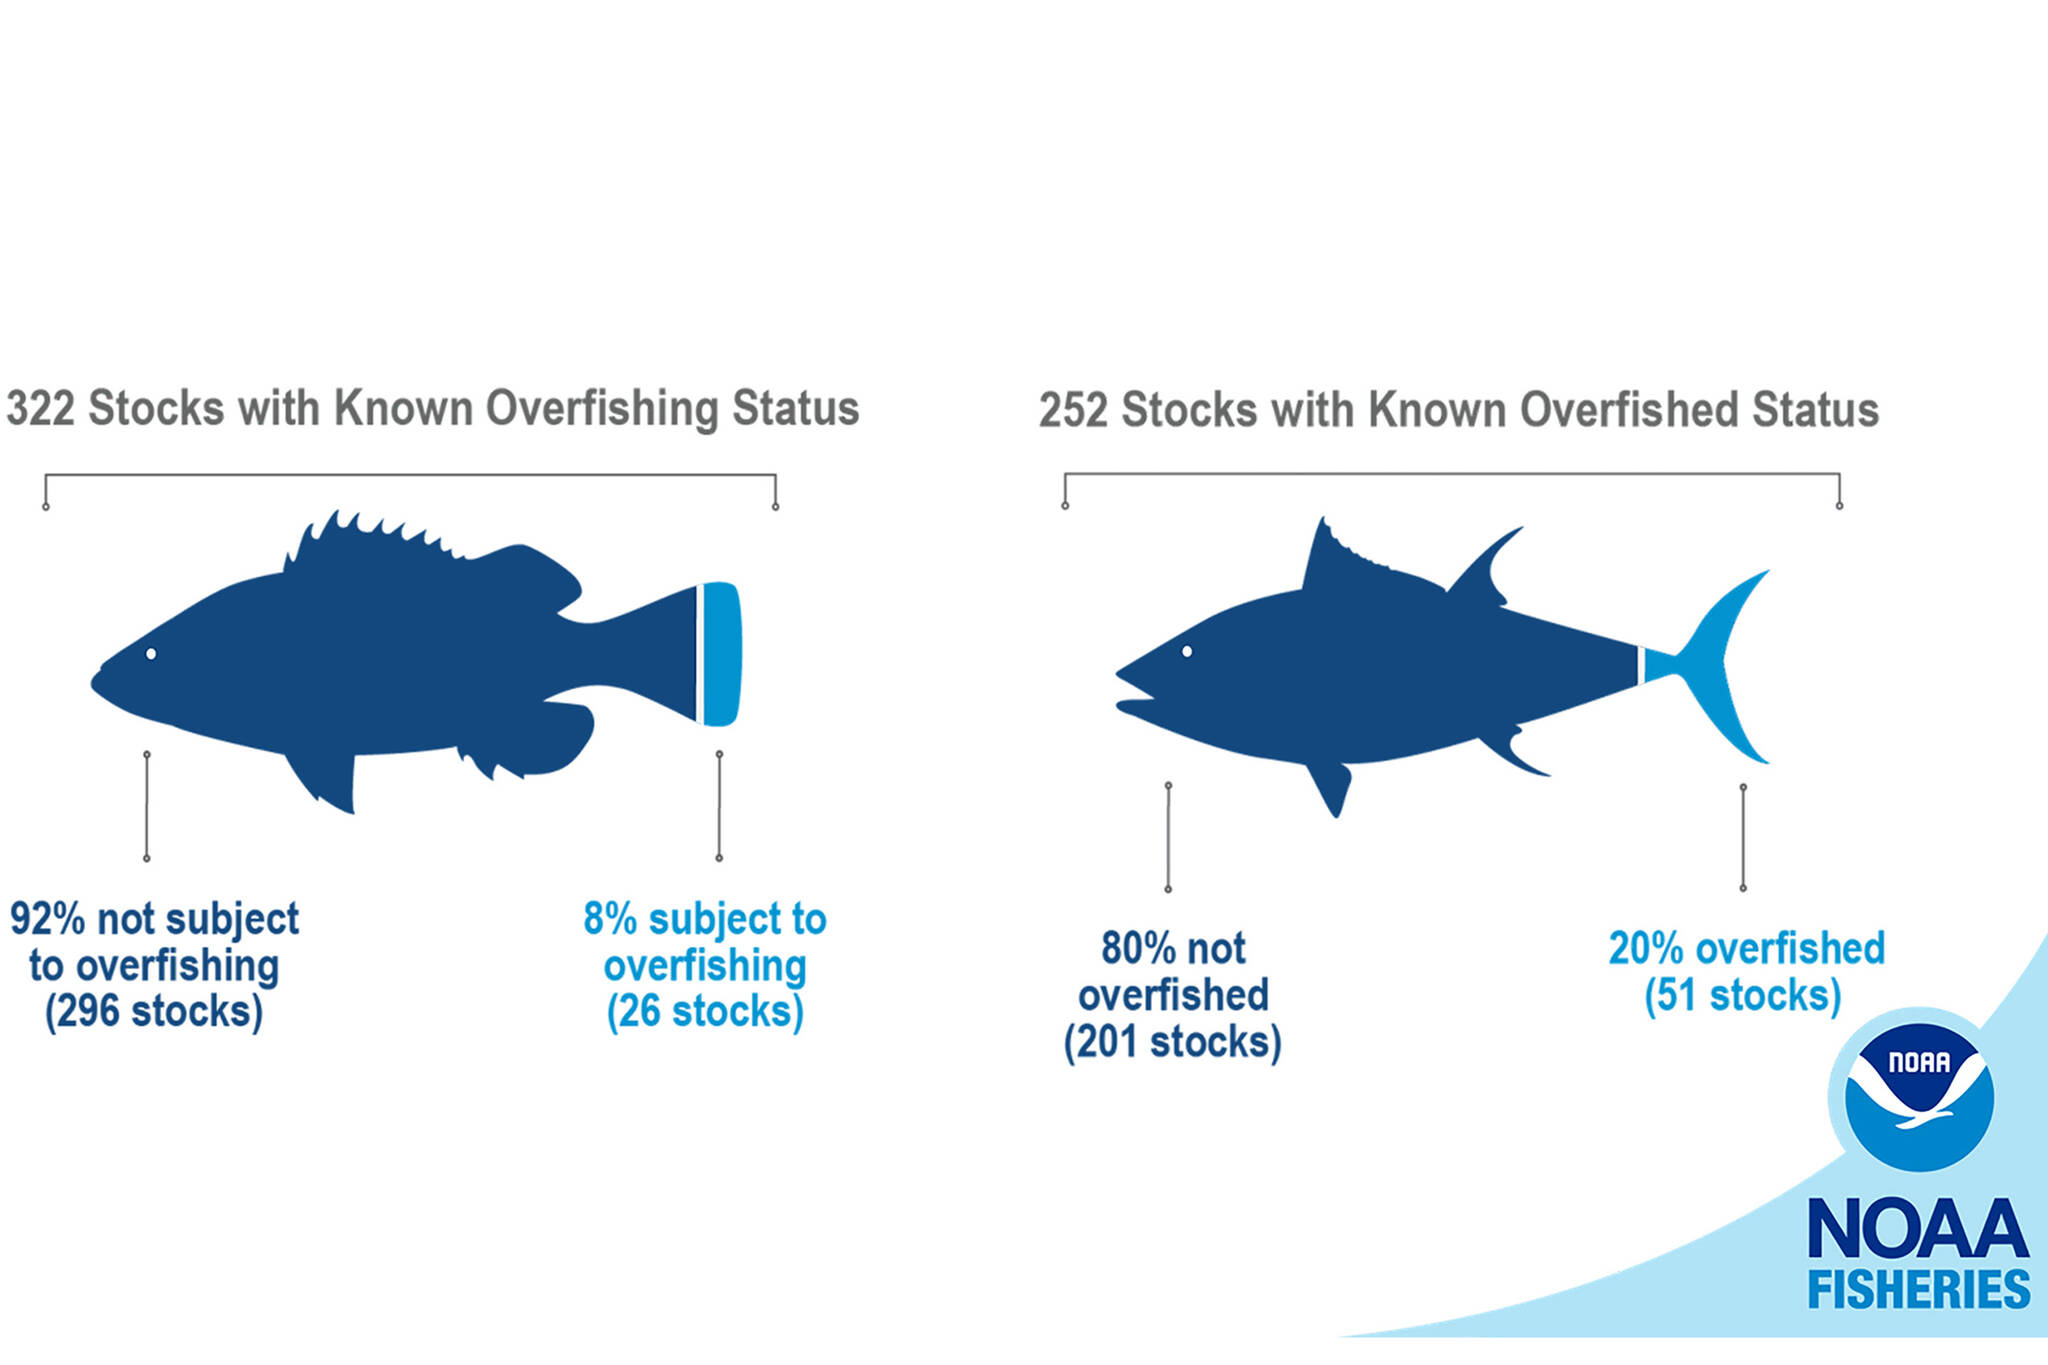 Of the more than 460 stoOf the more than 460 stocks managed by NOAA, 322 have a known overfishing status (296 not subject to overfishing and 26 subject to overfishing) and 252 have a known overfished status (201 not overfished and 51 overfished). (Courtesy Image / NOAA)